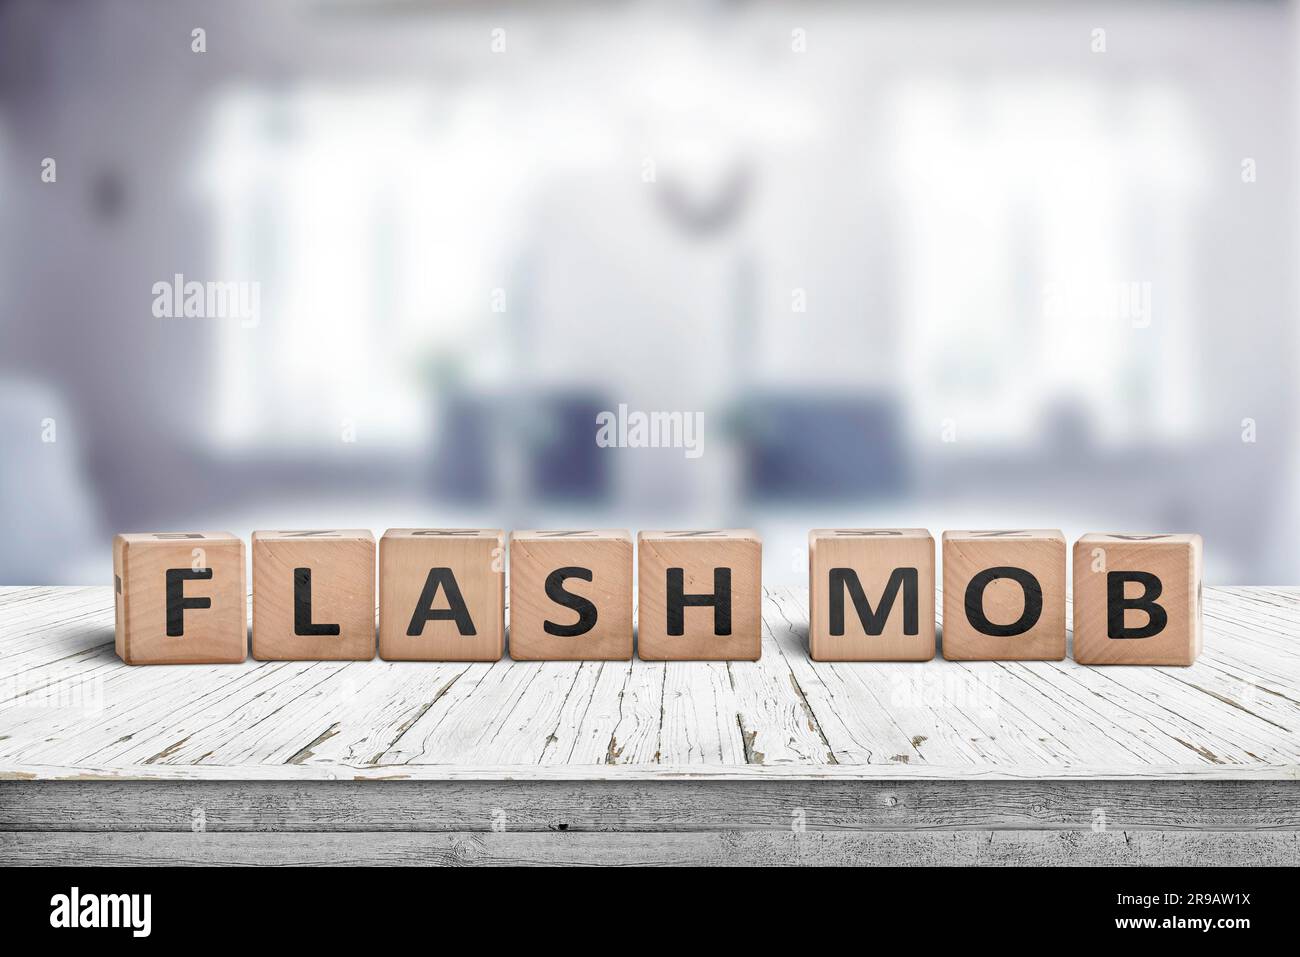 Flash mob message sign on a table in a bright room with light Stock Photo